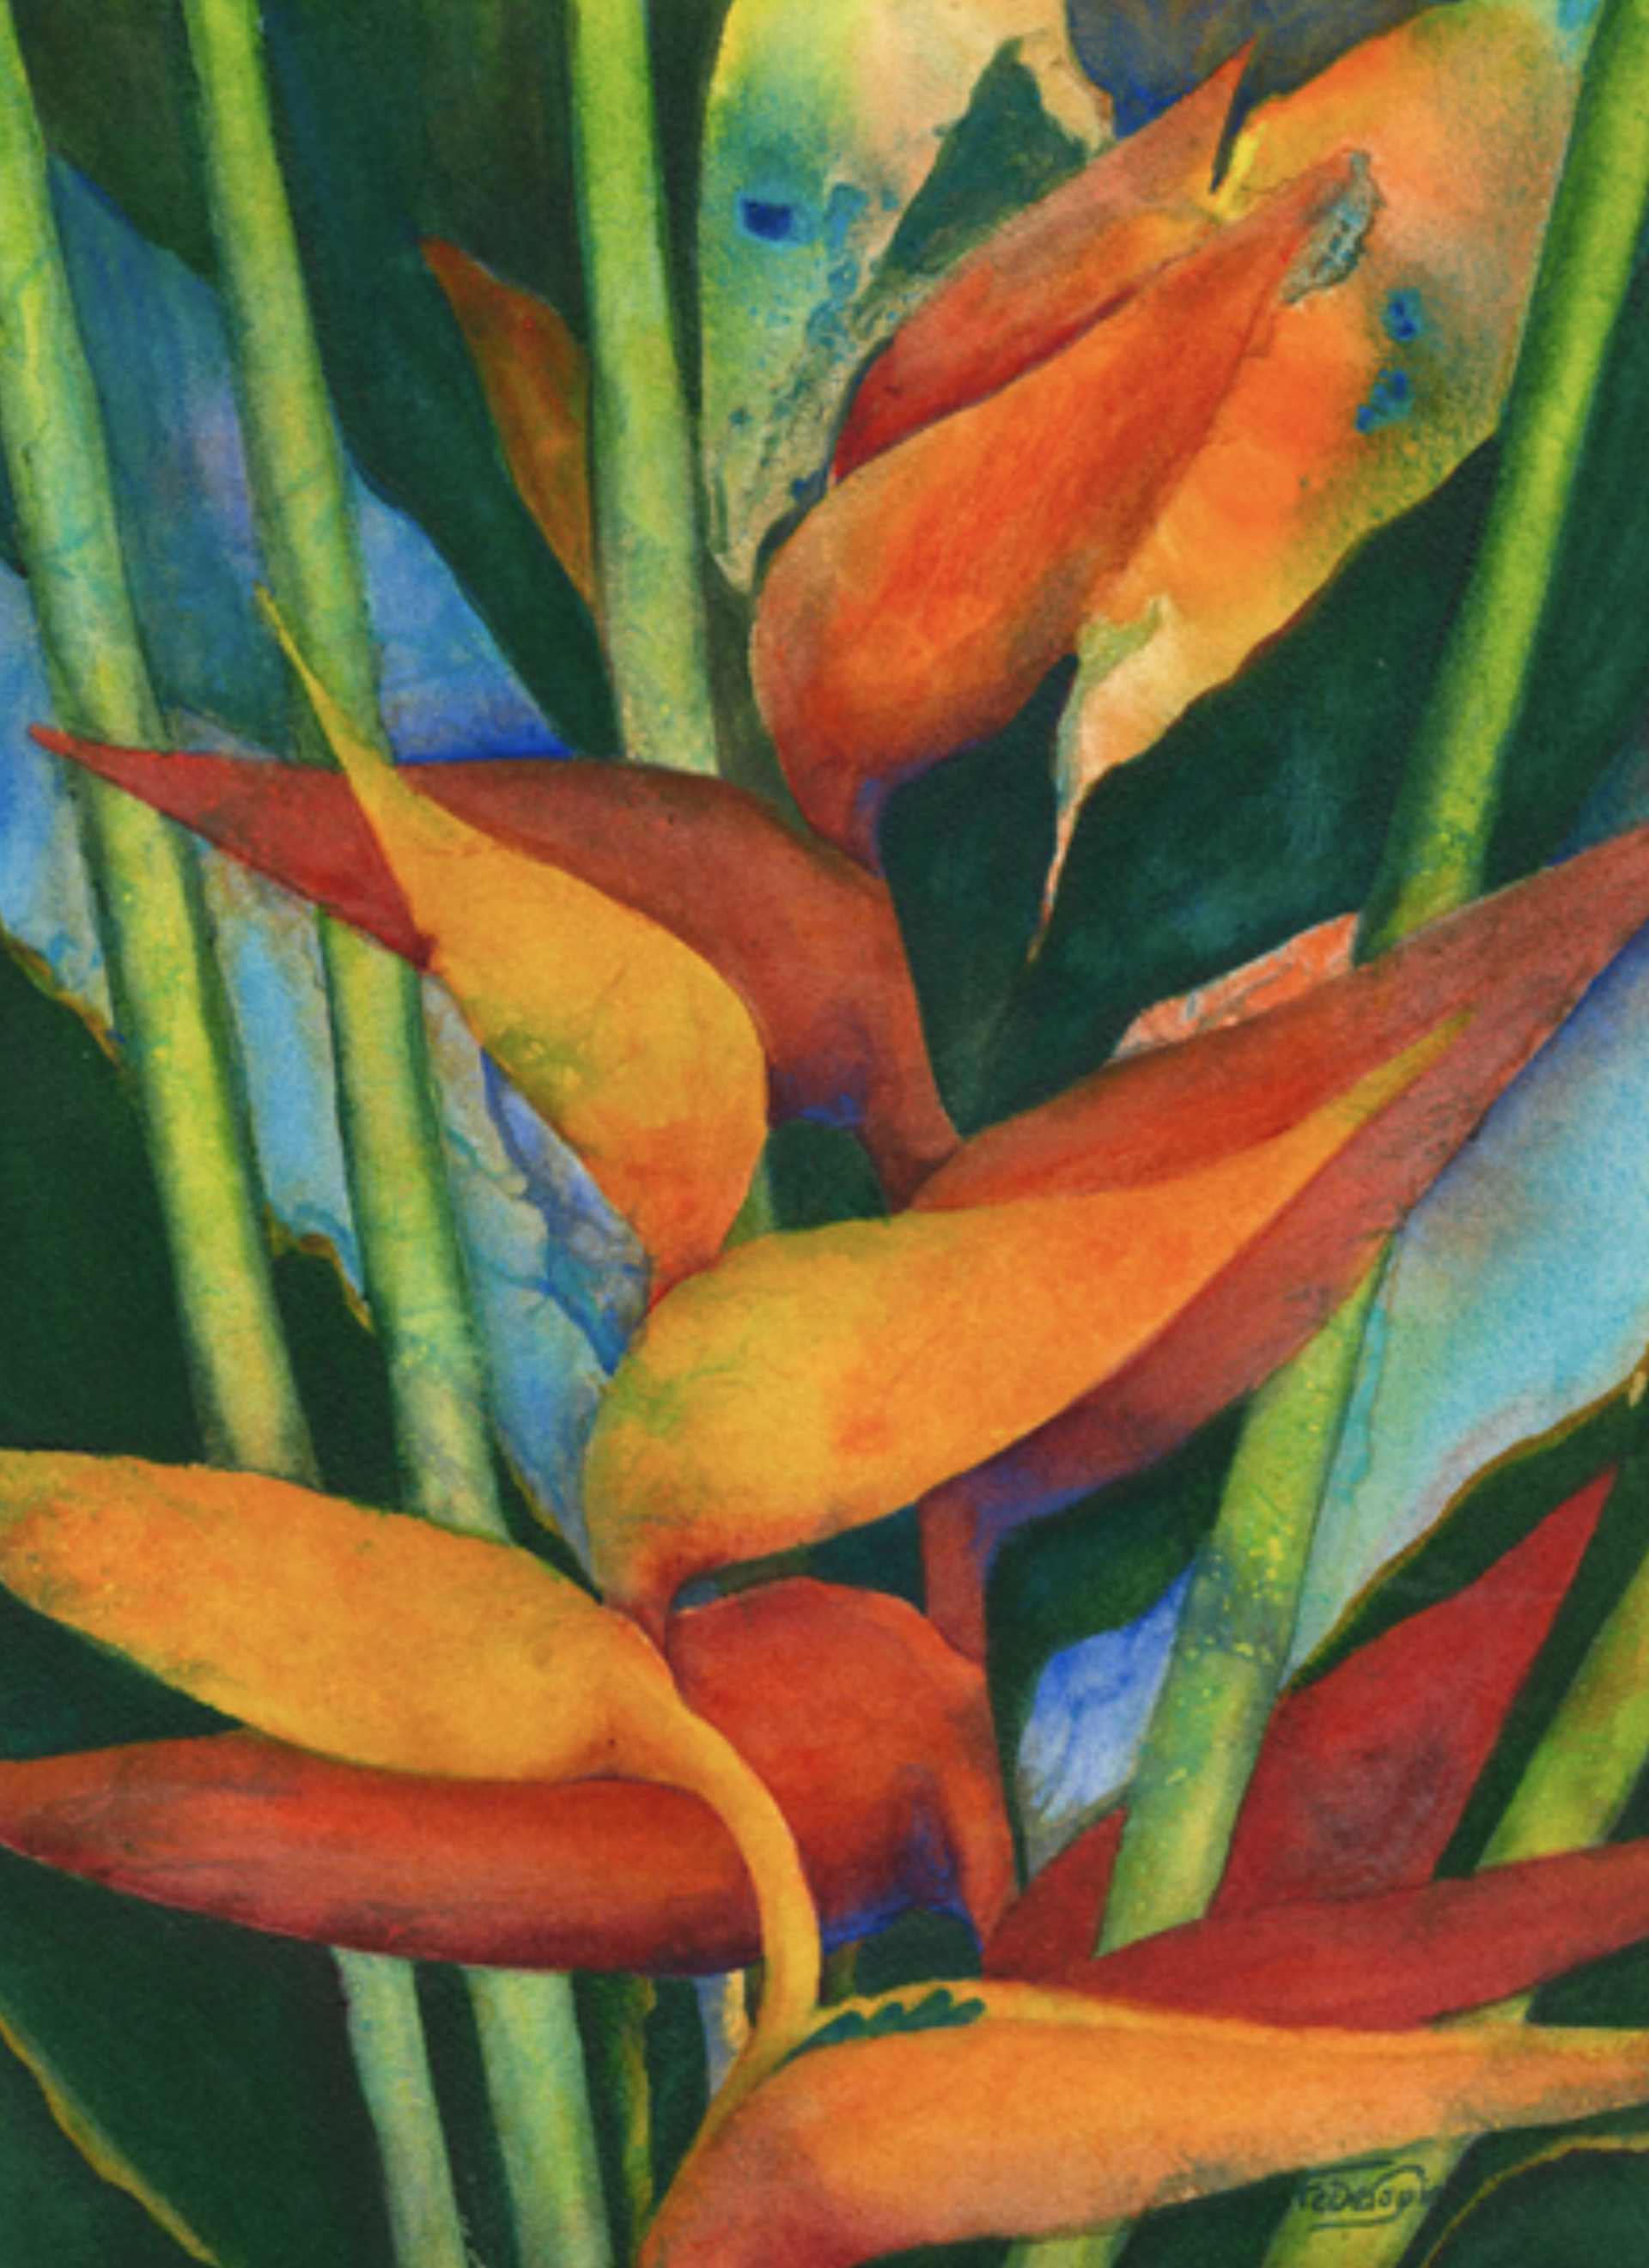 Heliconia Dreaming by Patrice Ann Federspiel